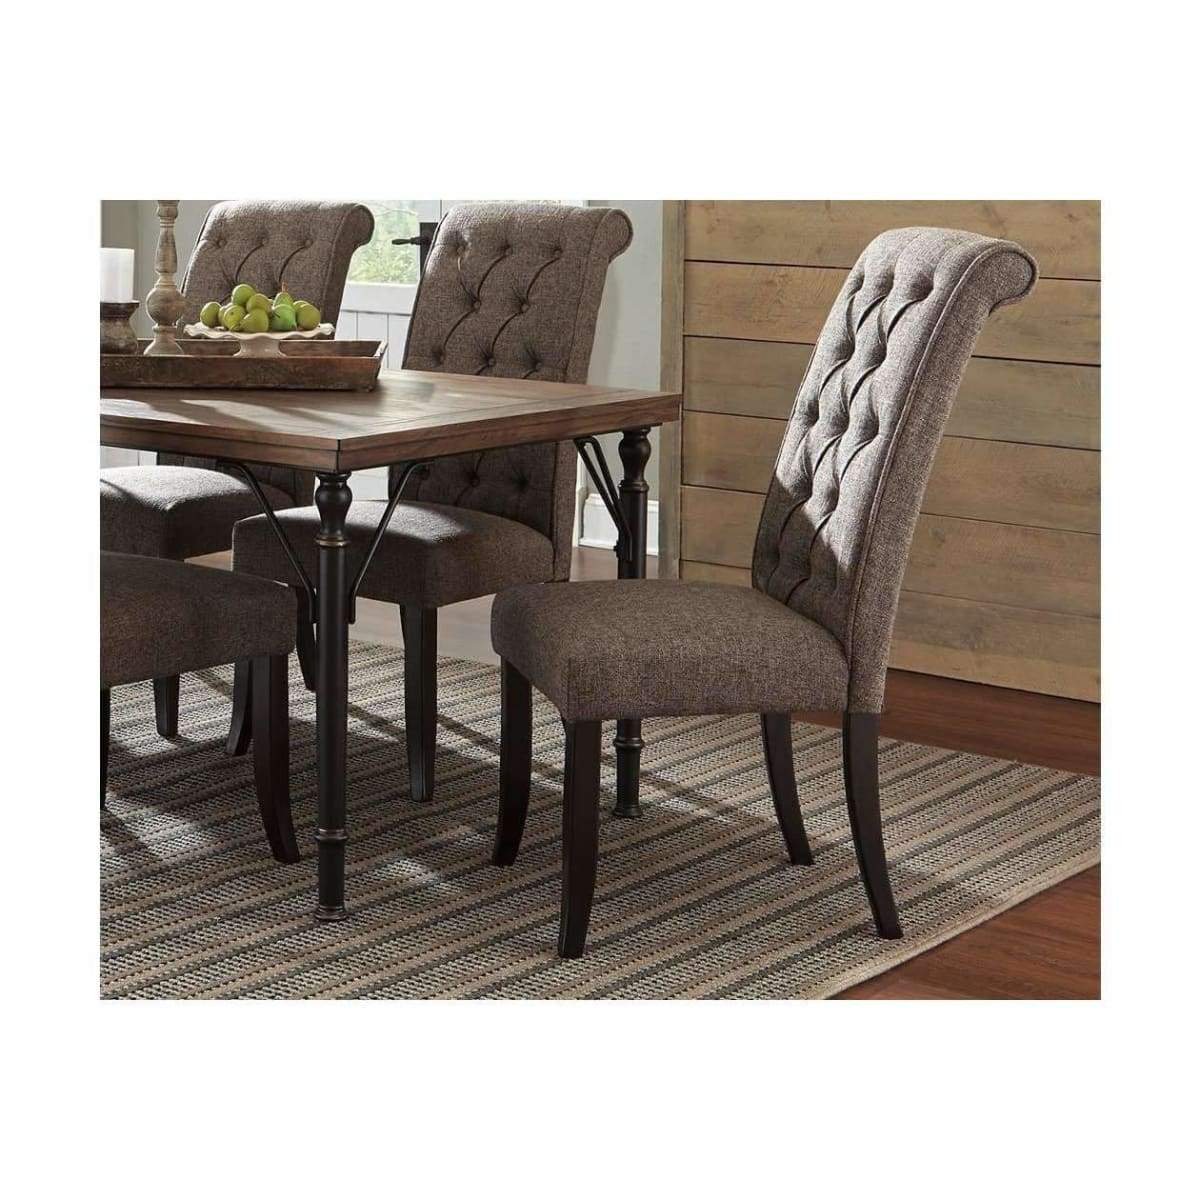 Tripton Graphite Dining Room Chair - dining chairs